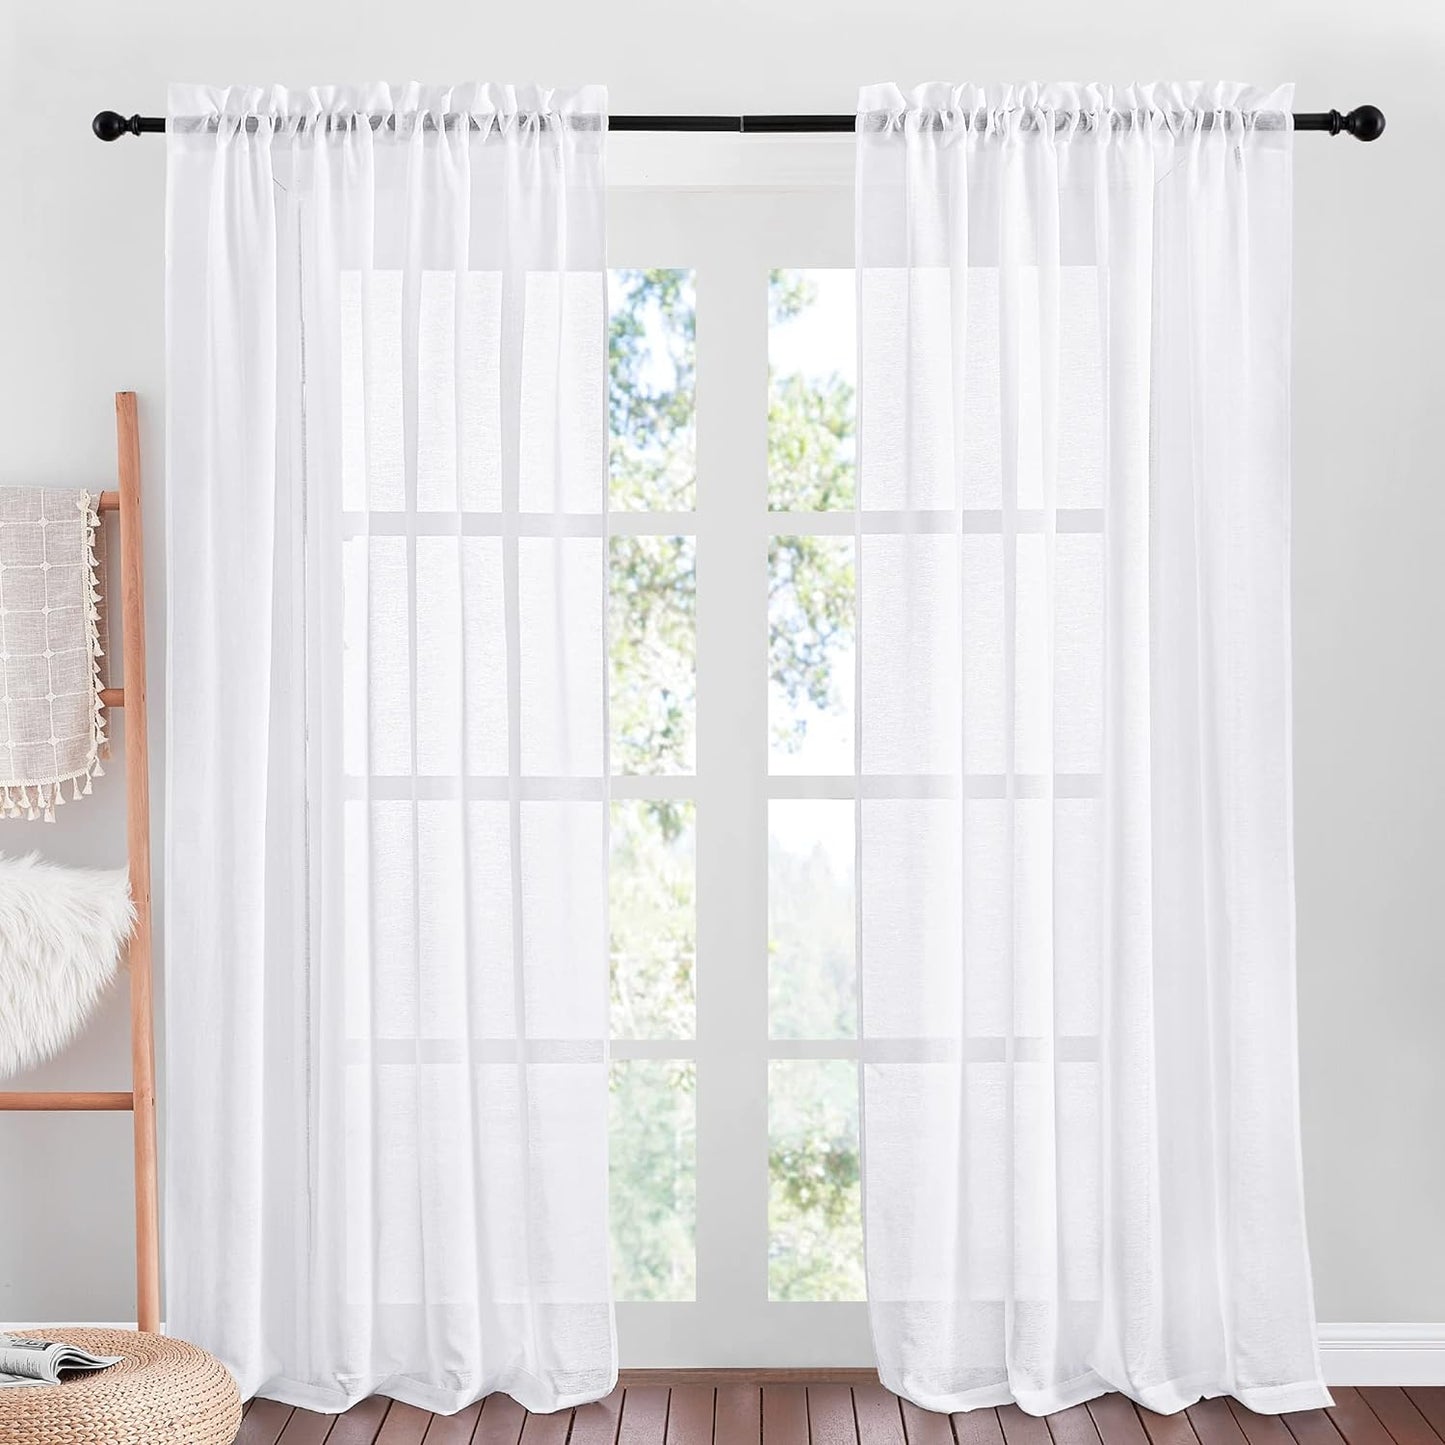 NICETOWN White Semi Sheer Curtains for Living Room- Linen Texture Light Airy Drapes, Rod Pocket & Back Tab Design Voile Panels for Large Window, Set of 2, 55 X 108 Inch  NICETOWN White - Rod Pocket Only W55 X L84 